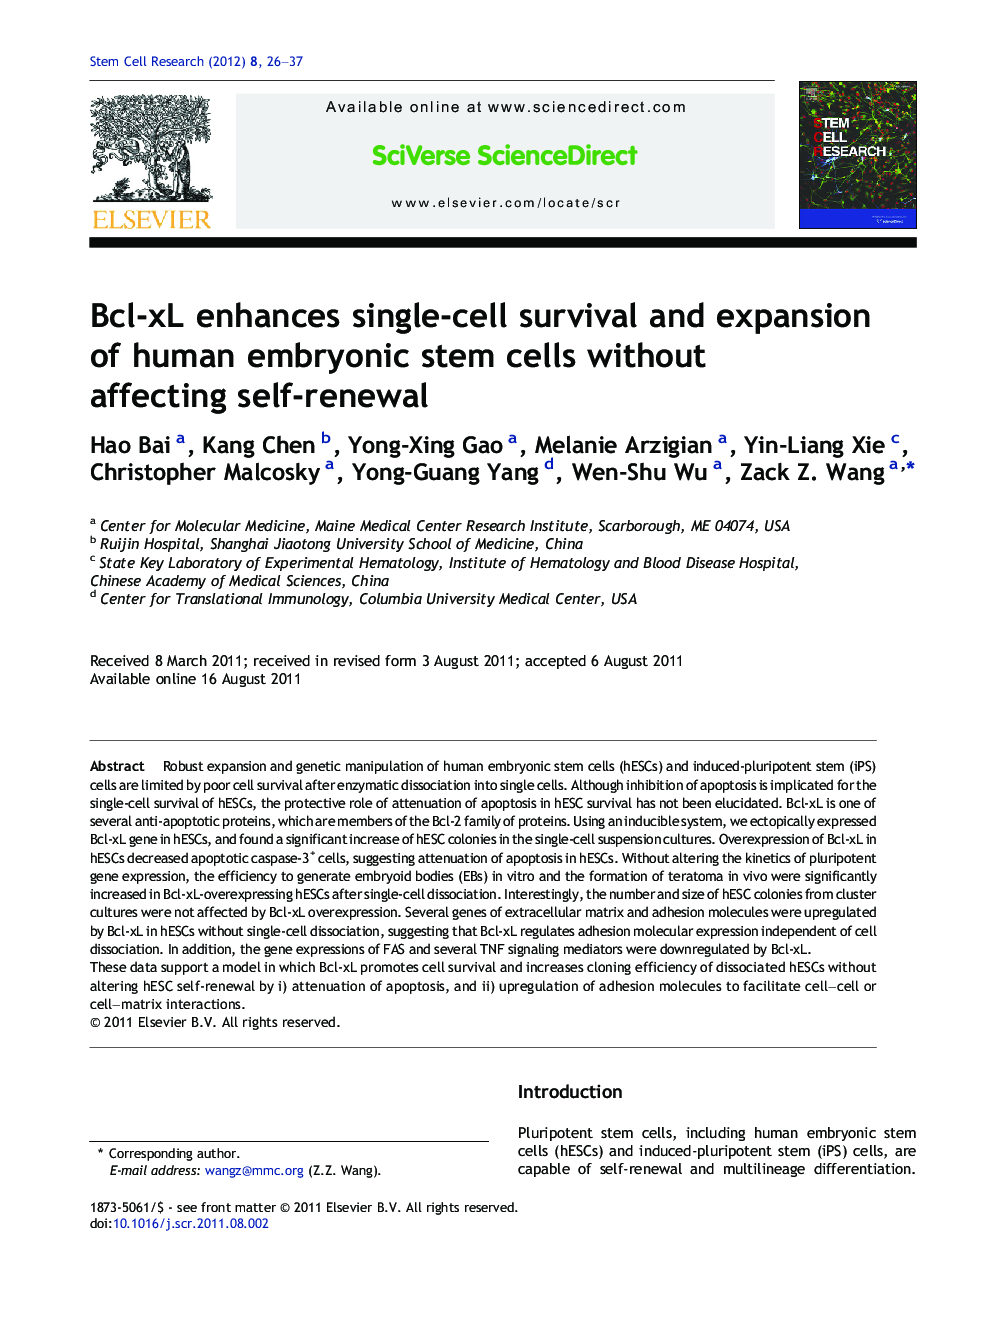 Bcl-xL enhances single-cell survival and expansion of human embryonic stem cells without affecting self-renewal